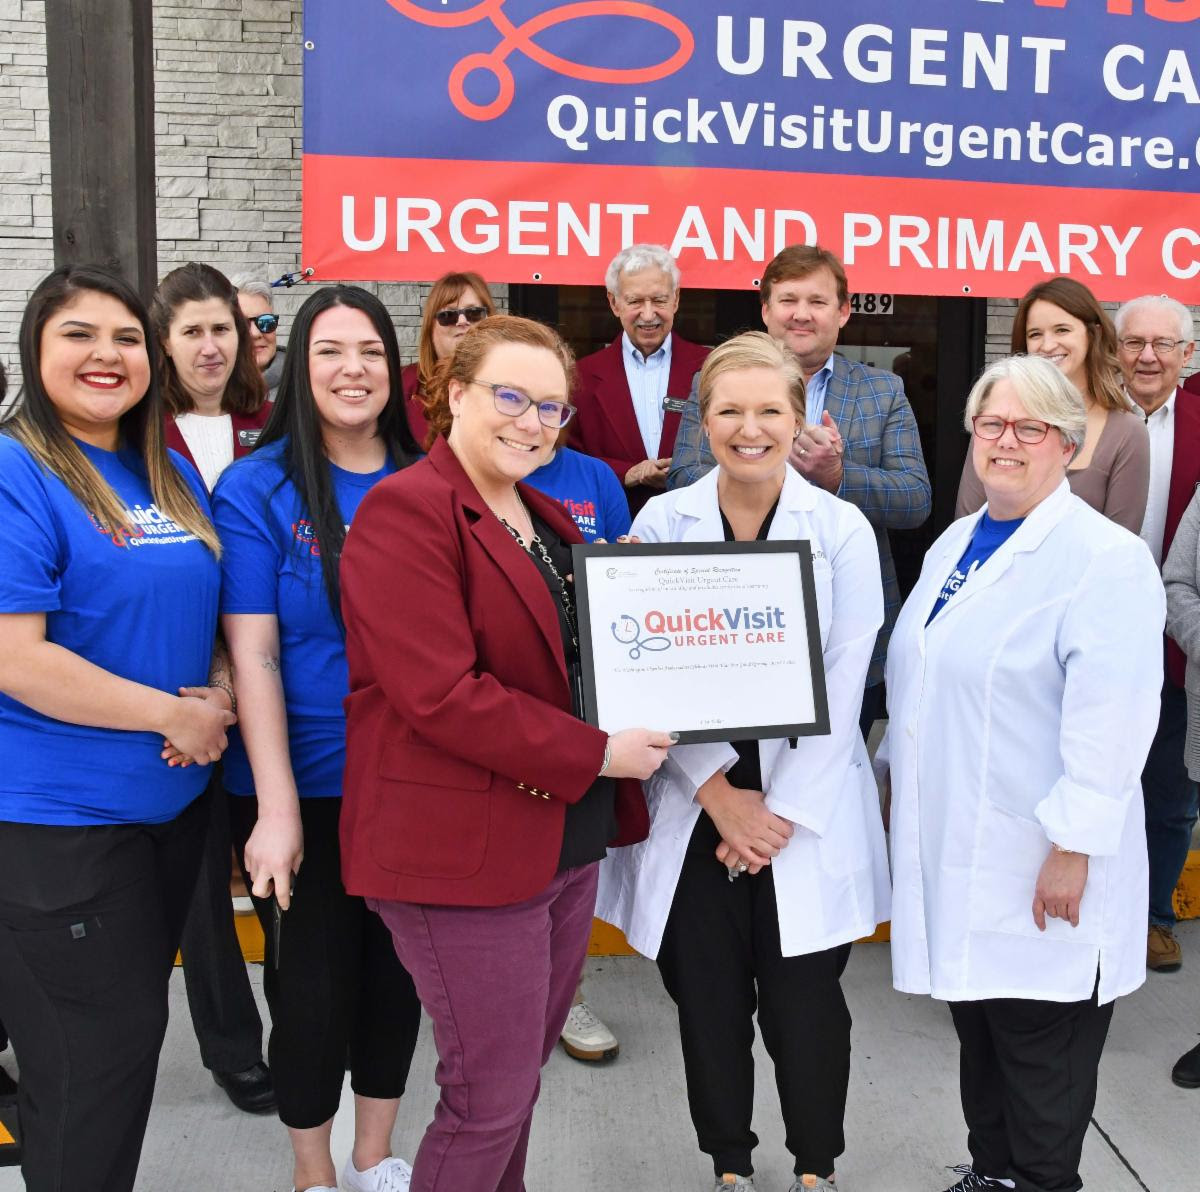 An urgent care opened this month in Washington County at 2489 Highway 92. CREDIT LYLE MOEN